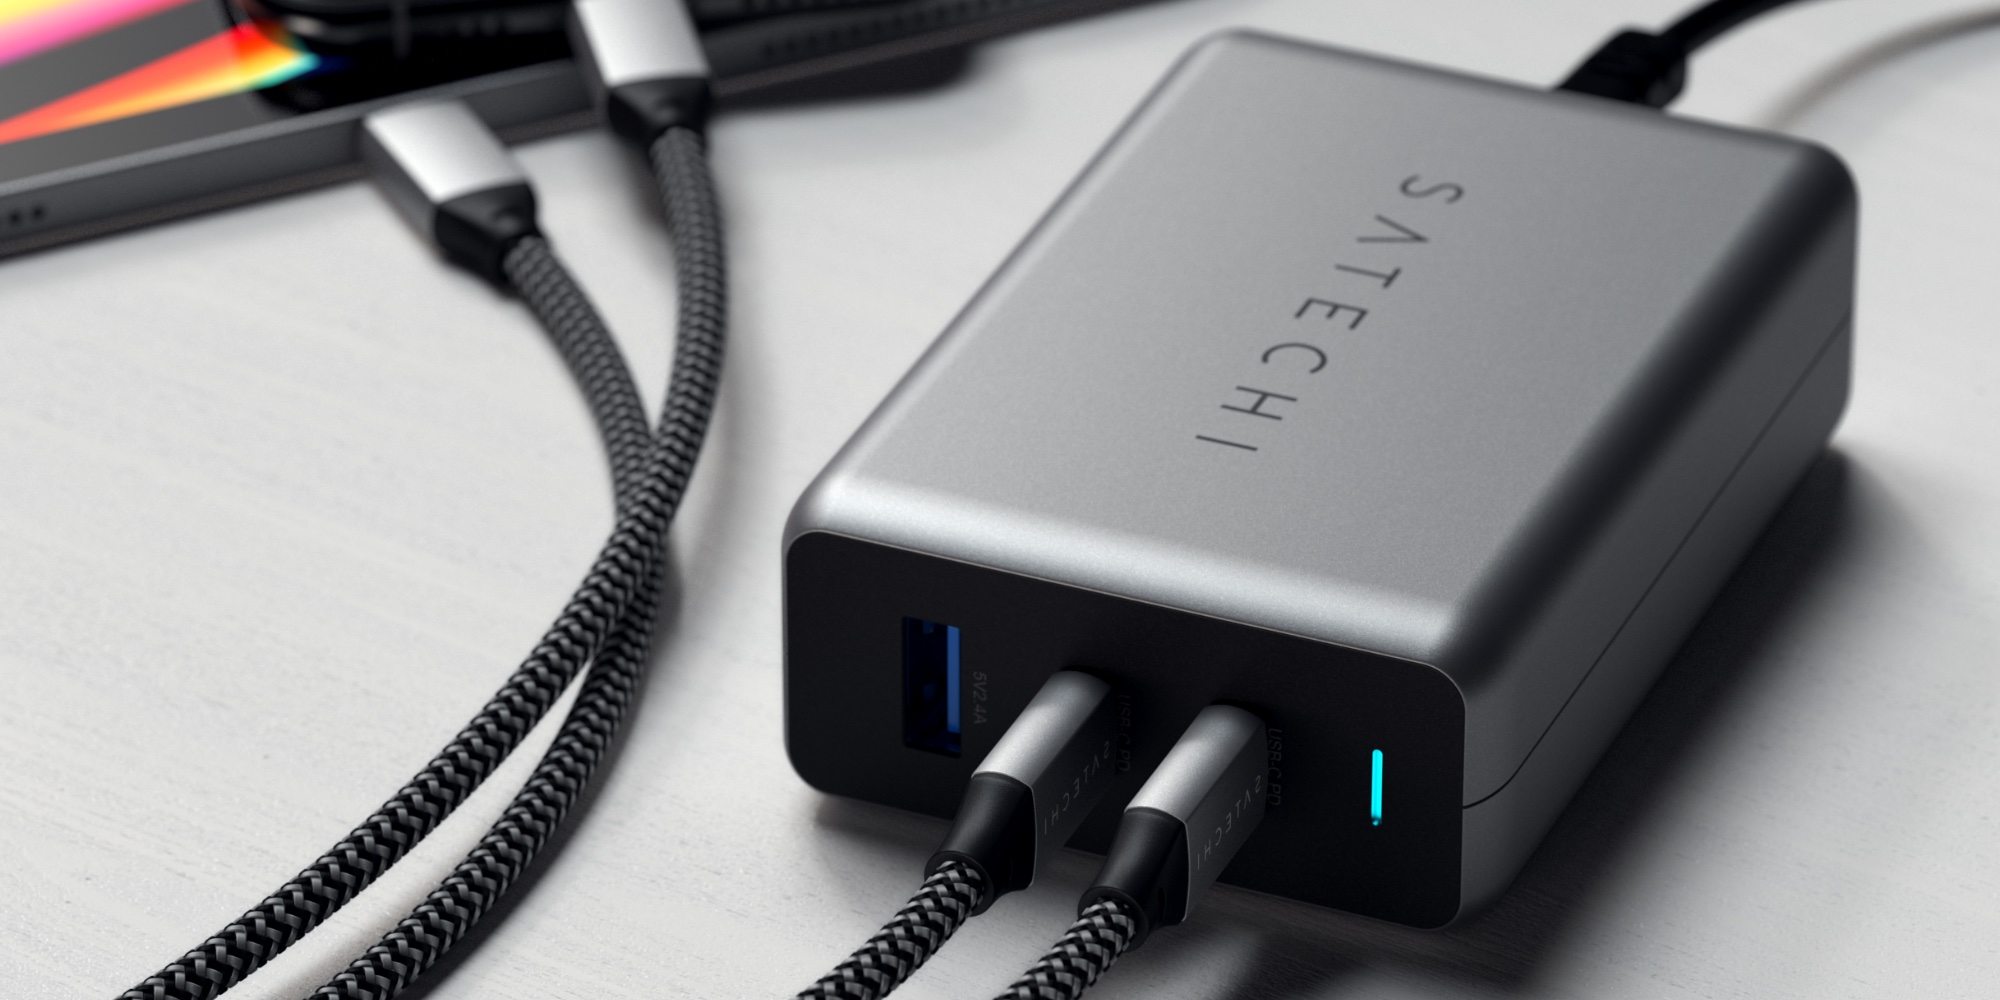 Satechi early Black Friday sale with 40% discounts USB-C chargers, hubs, more